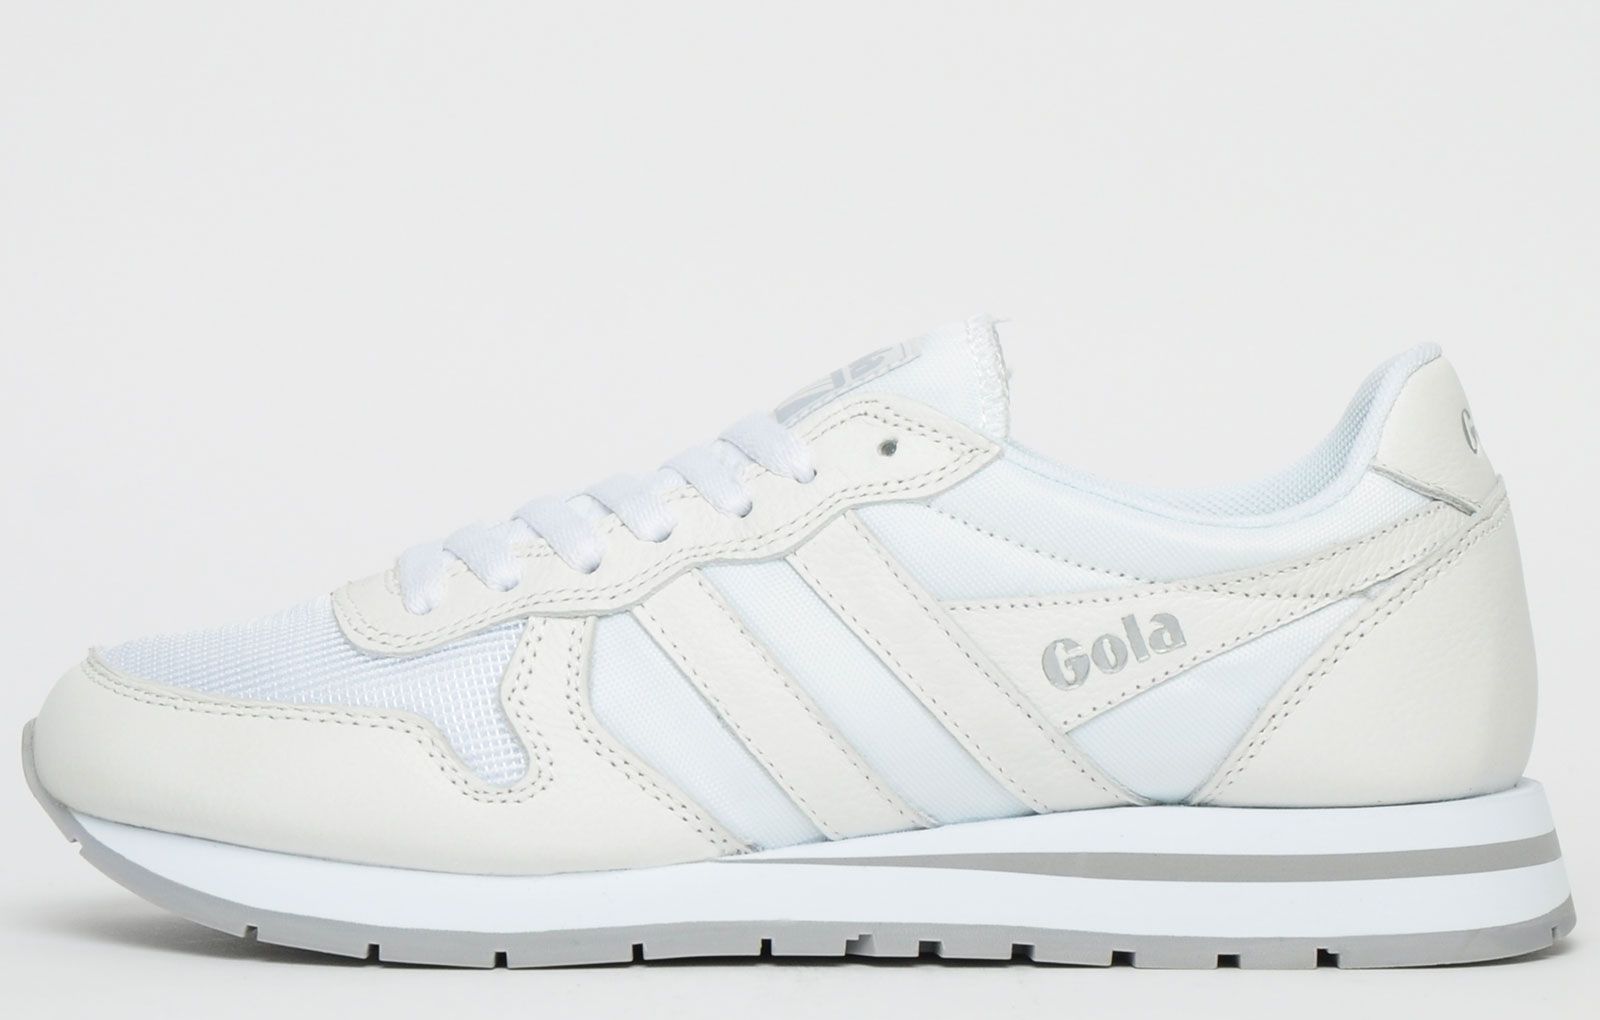 <p>Born in Britain in 1905, Gola holds its British Heritage close to its heart. Gola has been associated with numerous high profile sporting legends over the years and was the number 1 British Sportwear brand of the 1960`s and 70`s. Gola still produces some of the most iconic trainers of today and yester years too by reaching back into its archives to deliver authentic retro styling with occasionally a flavour of modern aesthetics. Gola creates footwear for those who choose not to follow the crowd and who want to stay true to the vintage retro trainer look.</p> <p>A vintage inspired jogger meets ‘90s on trend styling to form the outstanding Gola Classics Daytona leather for men. This reimagined version of Gola’s back catalogue style Daytona features a cushioned EVA midsole to give an authentic nod to Gola’s genuine heritage roots. Teamed with a mix of open mesh, nylon, and leather panels in classic white, highlighted with a touch of silver Gola branding</p> <p>- Leather/textile upper</p> <p>- Retro runner styling</p> <p>- Eva midsole</p> <p>- Cushioned insole</p> <p>- Padded ankle collar</p> <p>- Gola Classics branding throughout</p>